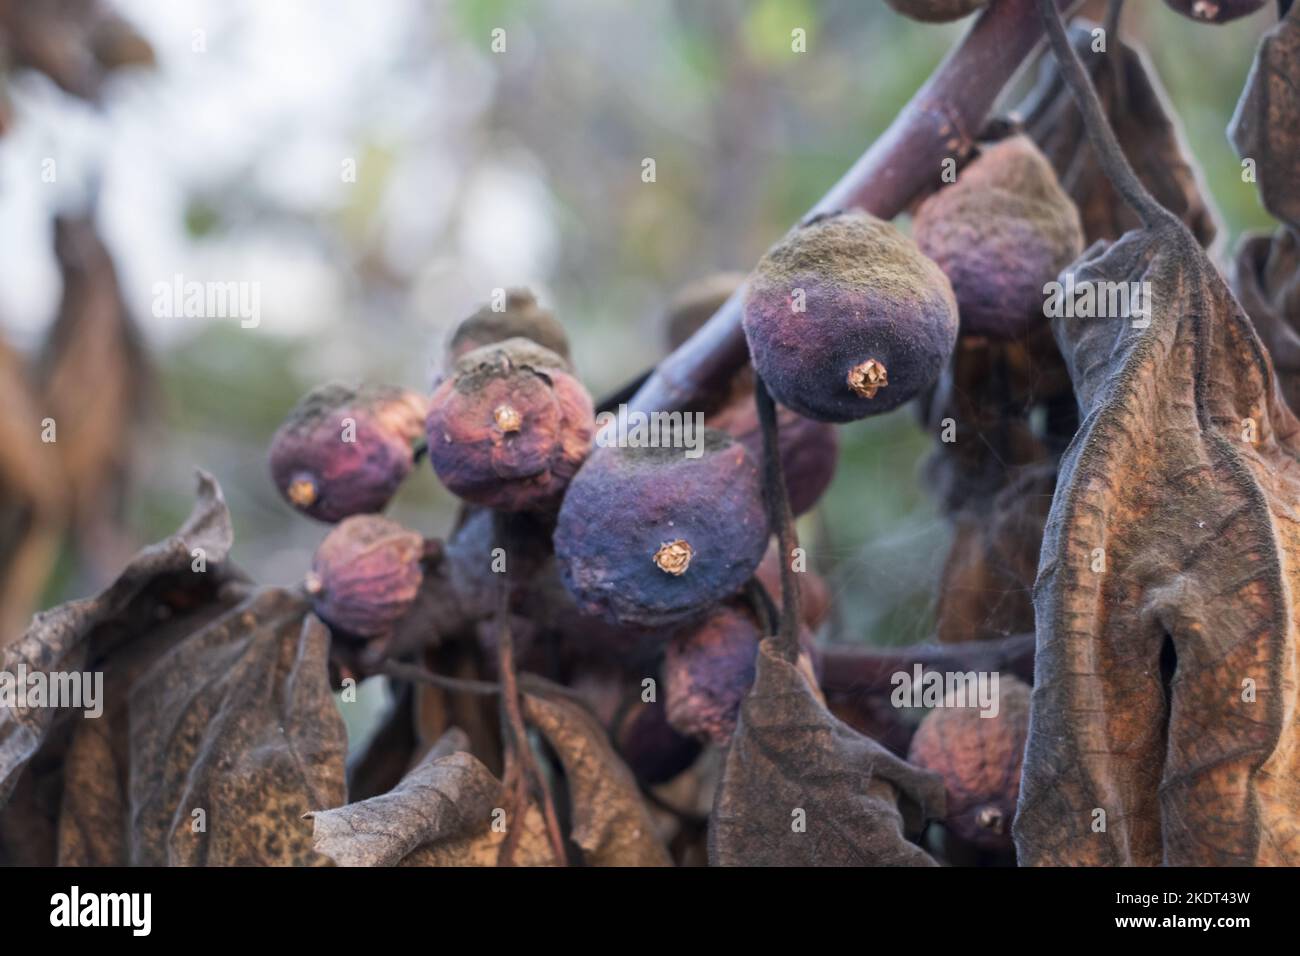 Spoiled and rotten figs on tree. Harvest problem because of dry summer Stock Photo